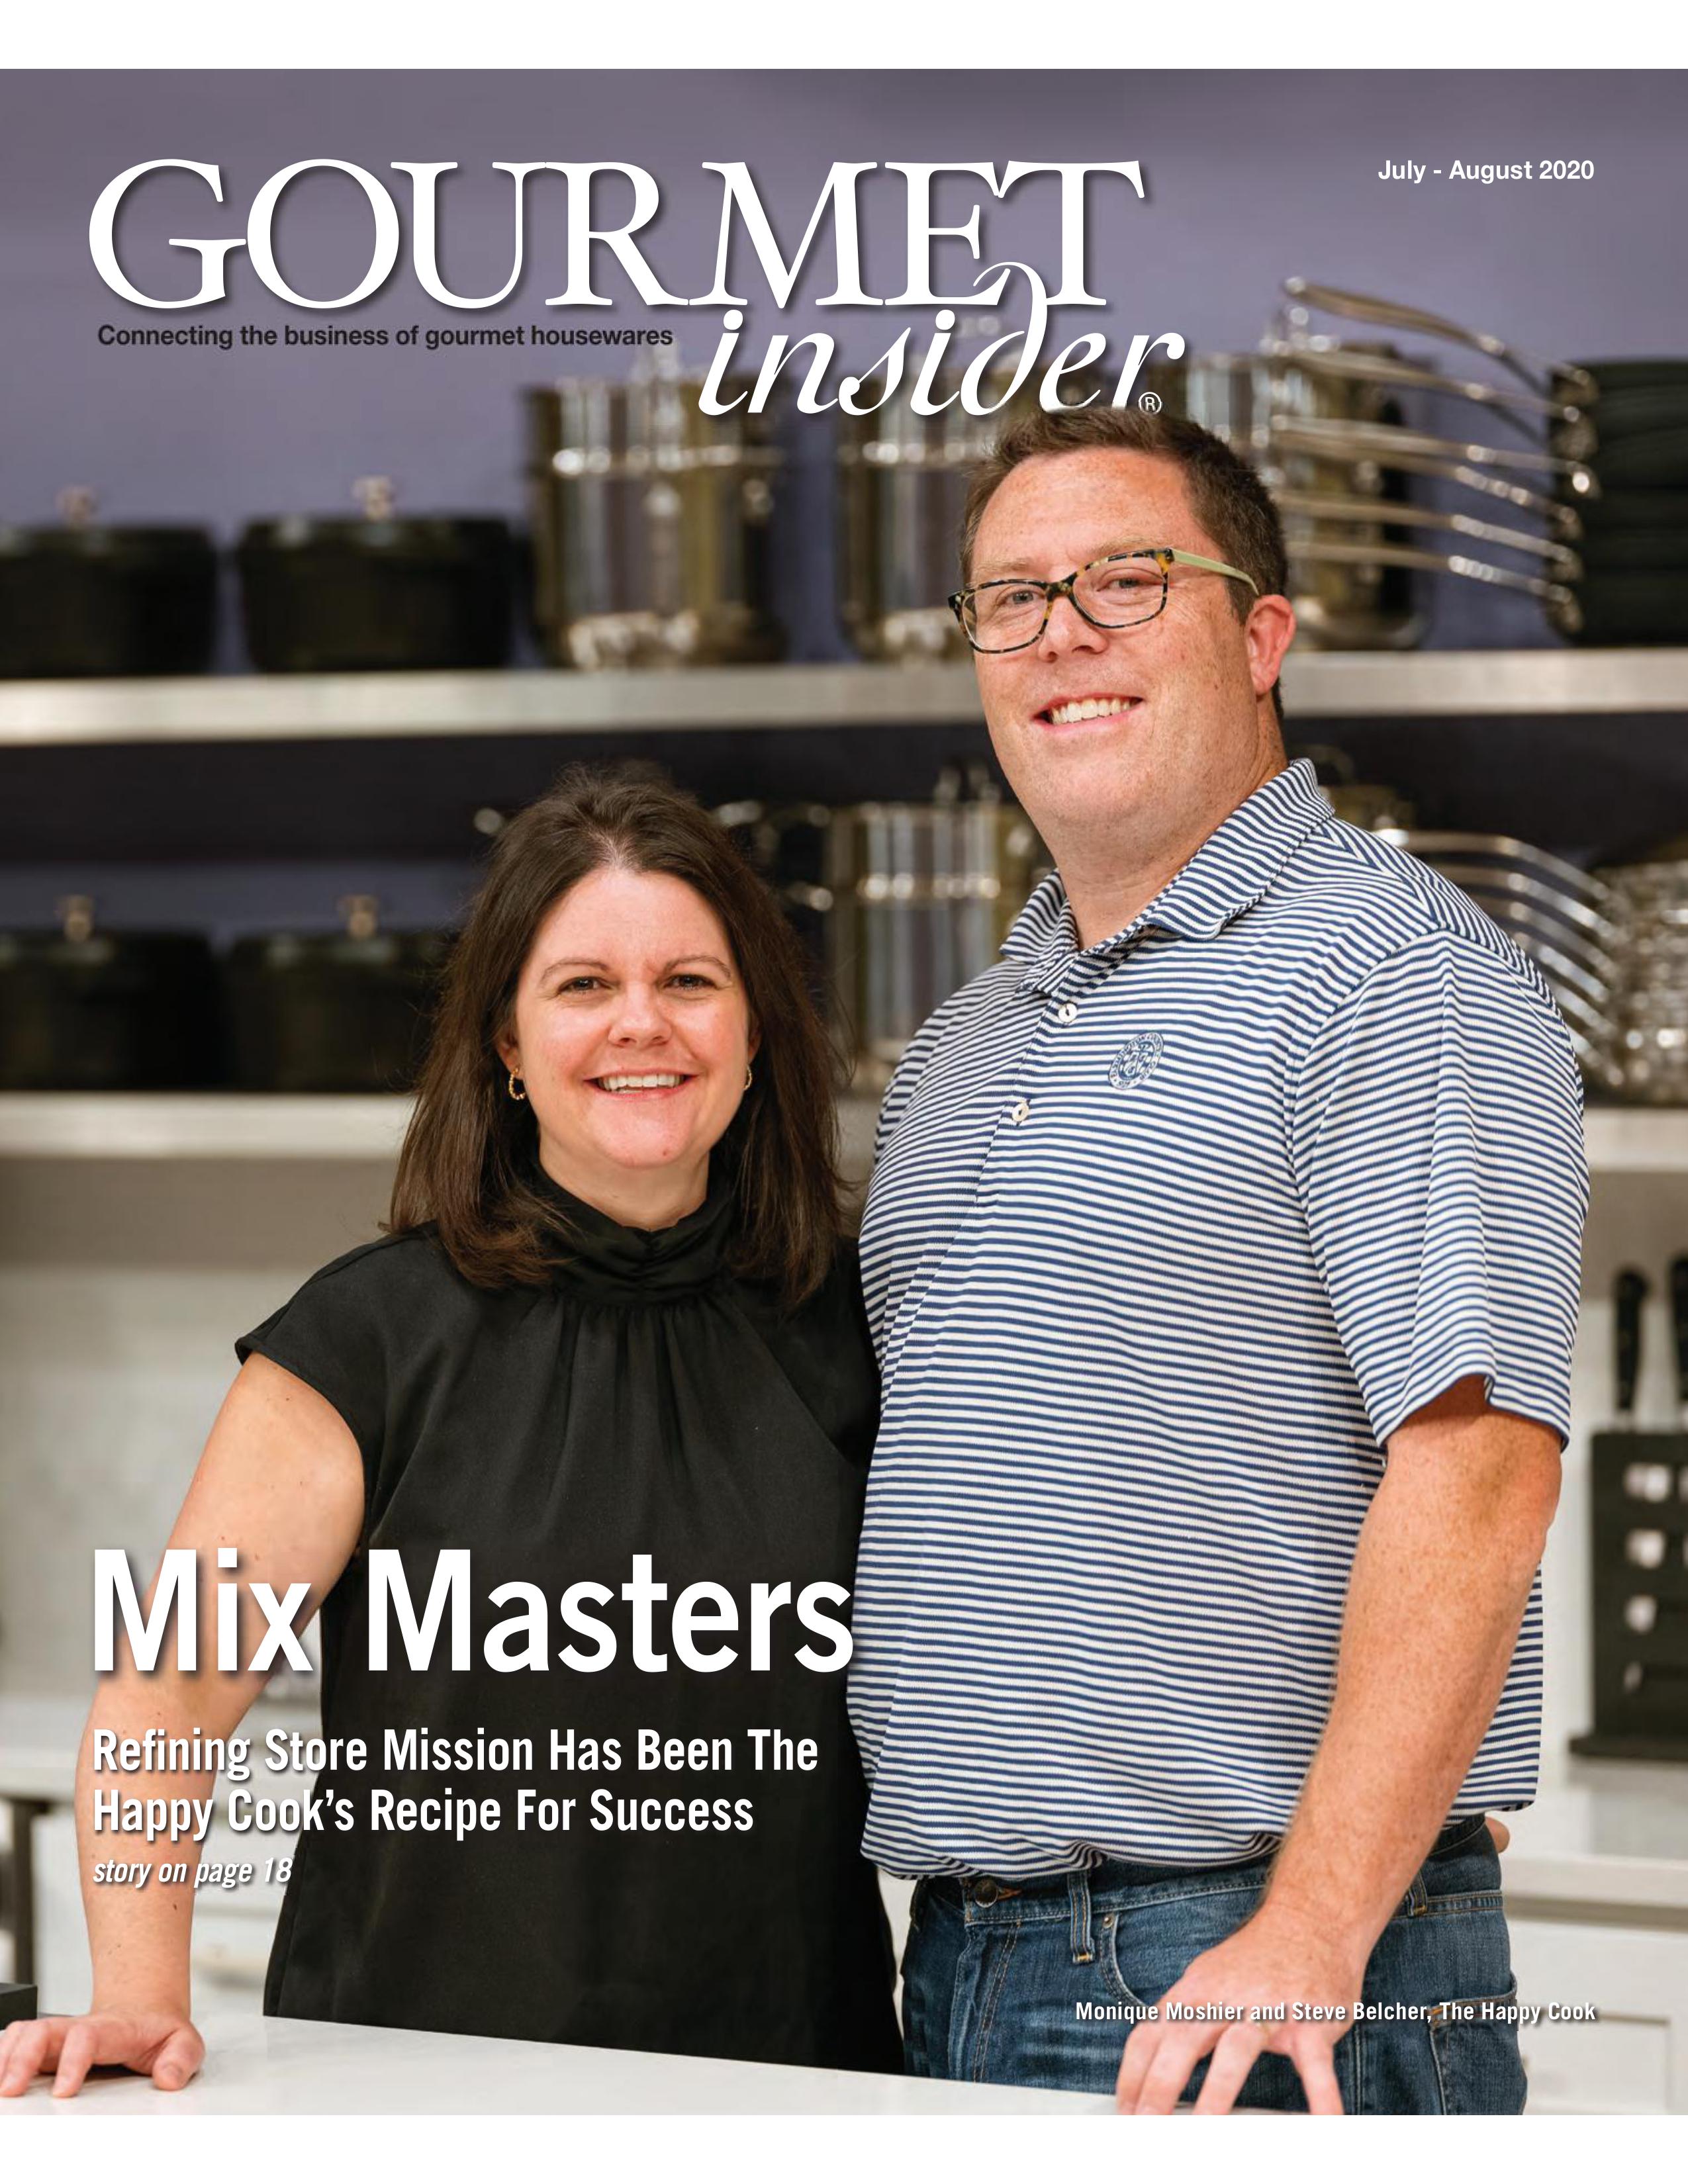 The Happy Cook Named All-Star Retailer for 2020 by Gourmet Insider Magazine